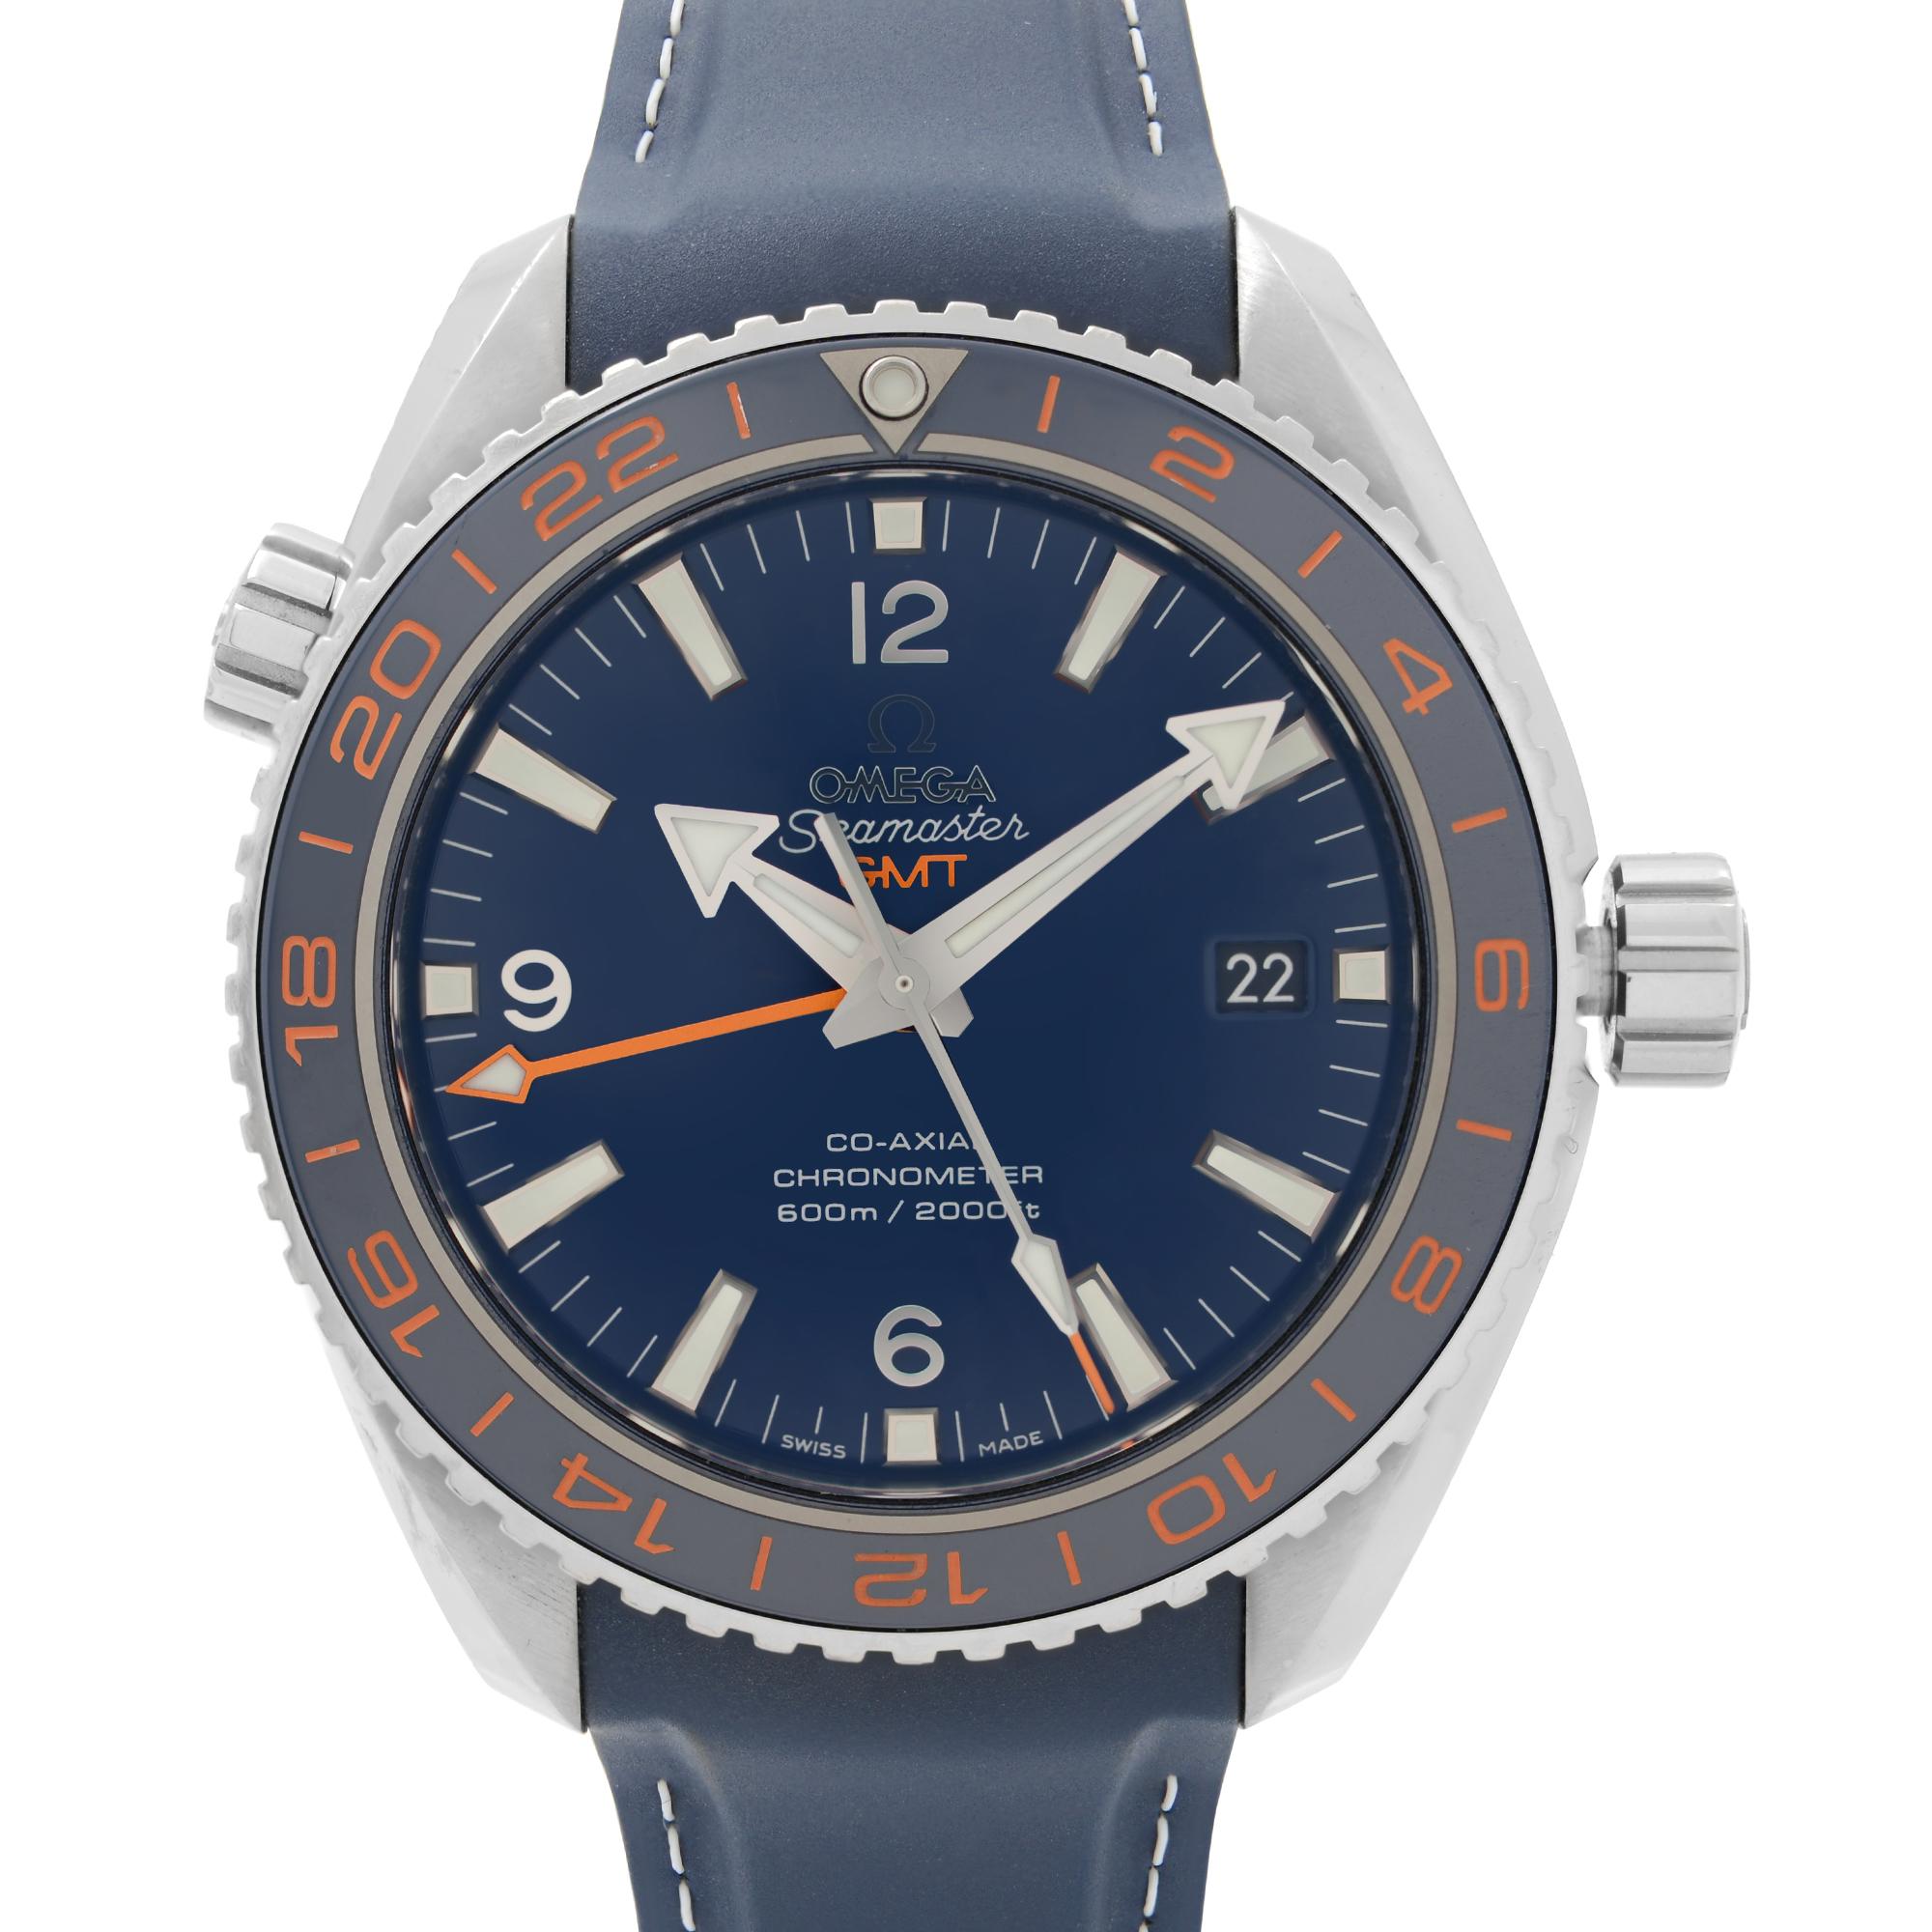 Pre-Owned Excellent Condition Omega Seamaster 600M Planet Ocean GMT 43.5mm Stainless Steel Blue Dial Men's Automatic Watch 232.32.44.22.03.001. This Timepiece is powered by an Automatic Movement and Features: Stainless Steel Round Case and Blue